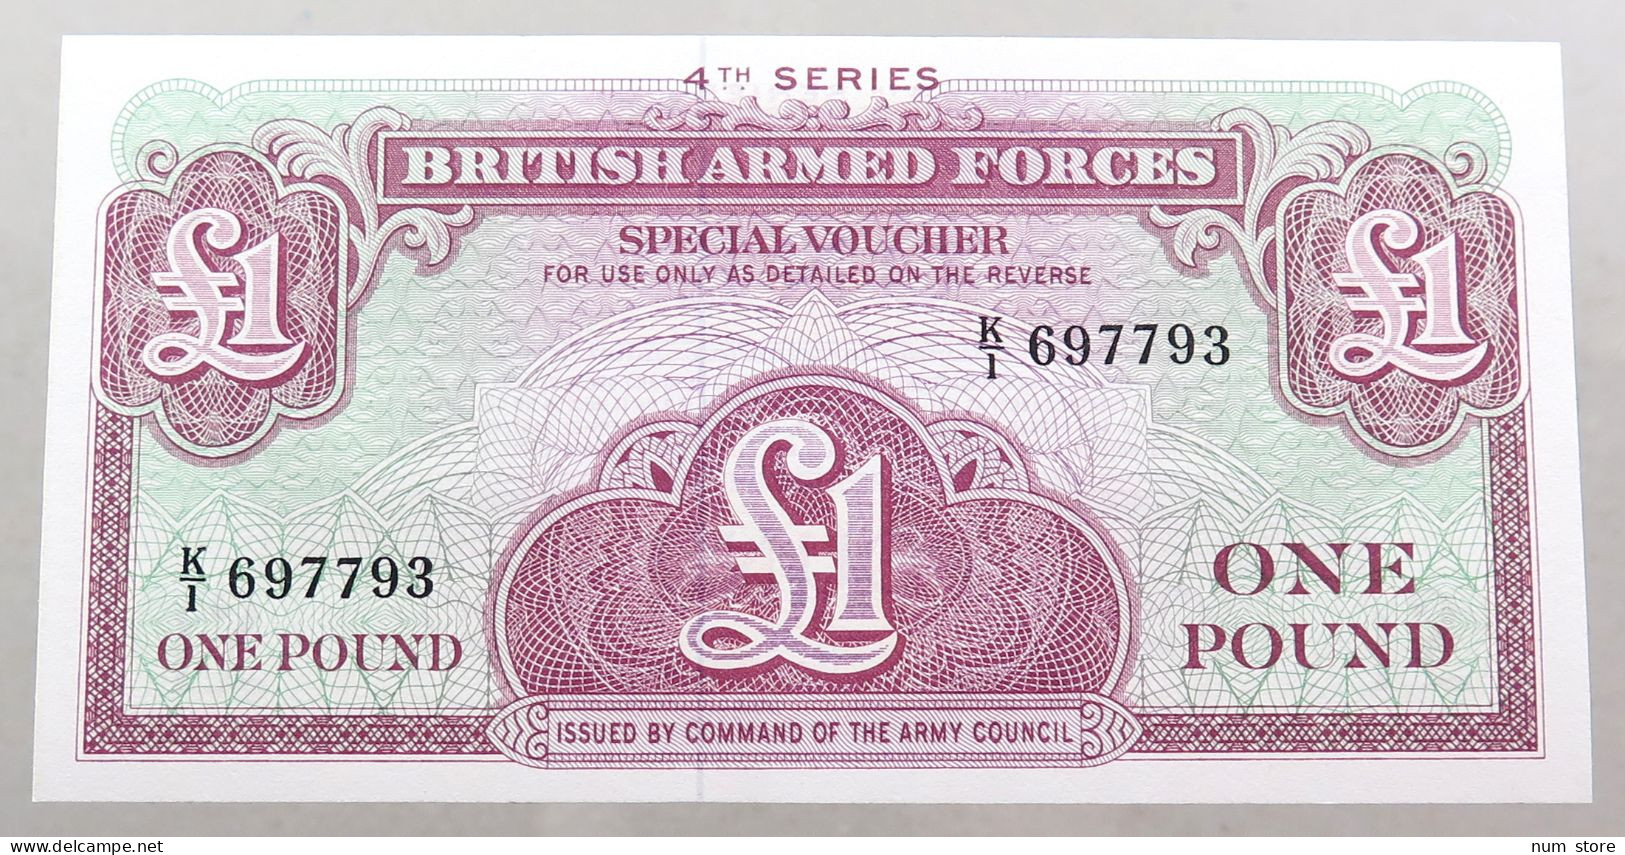 GREAT BRITAIN POUND  BRITISH ARMED FORCES #alb049 0181 - British Armed Forces & Special Vouchers